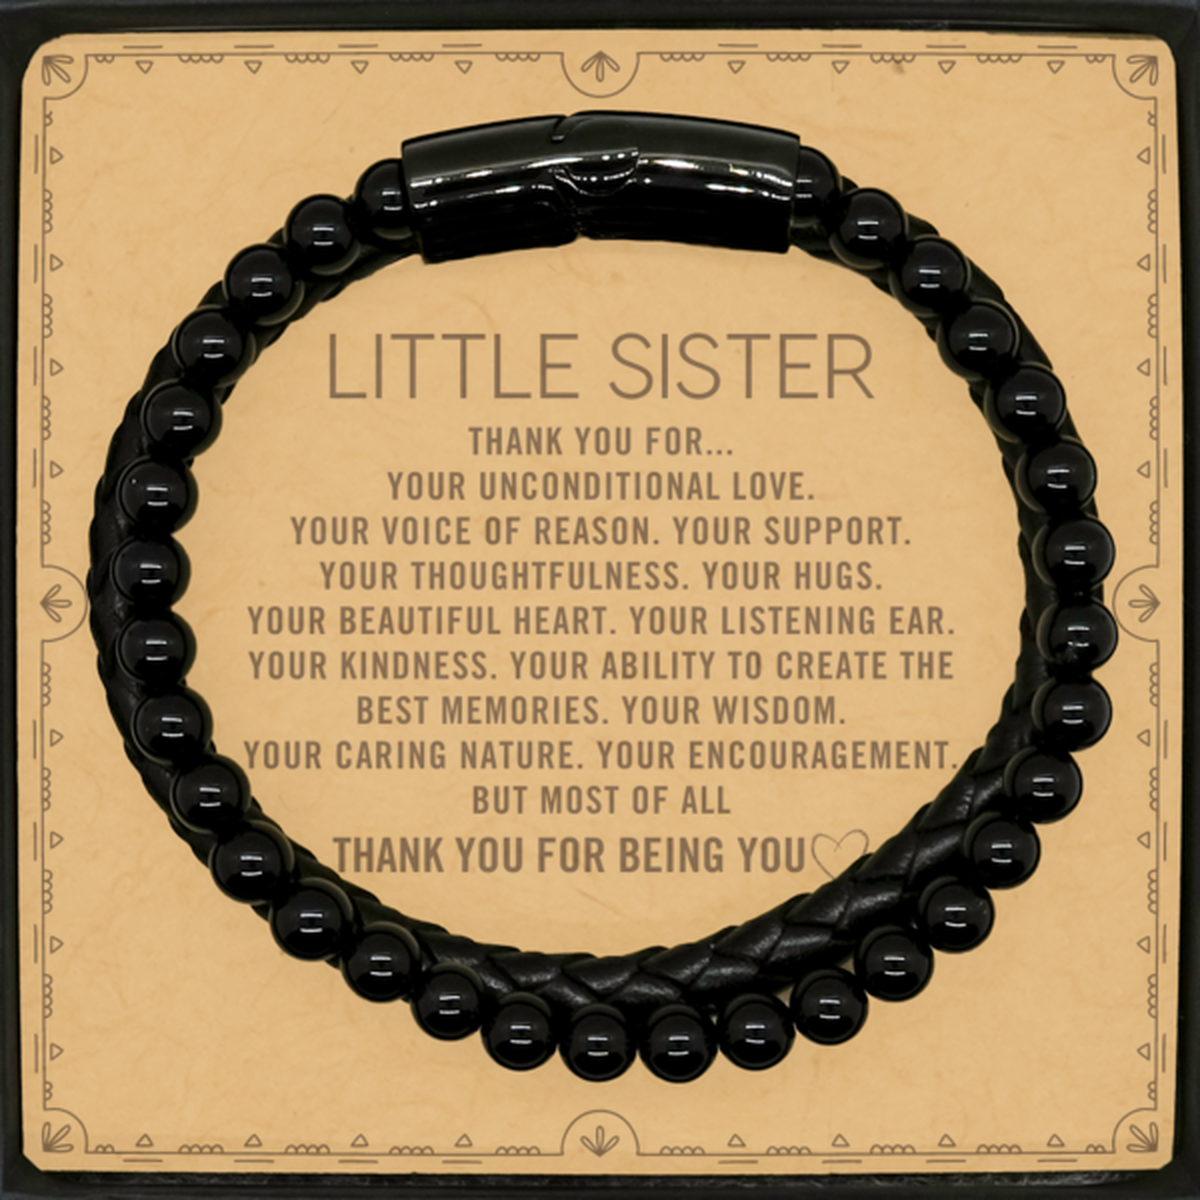 Little Sister Stone Leather Bracelets Custom, Message Card Gifts For Little Sister Christmas Graduation Birthday Gifts for Men Women Little Sister Thank you for Your unconditional love